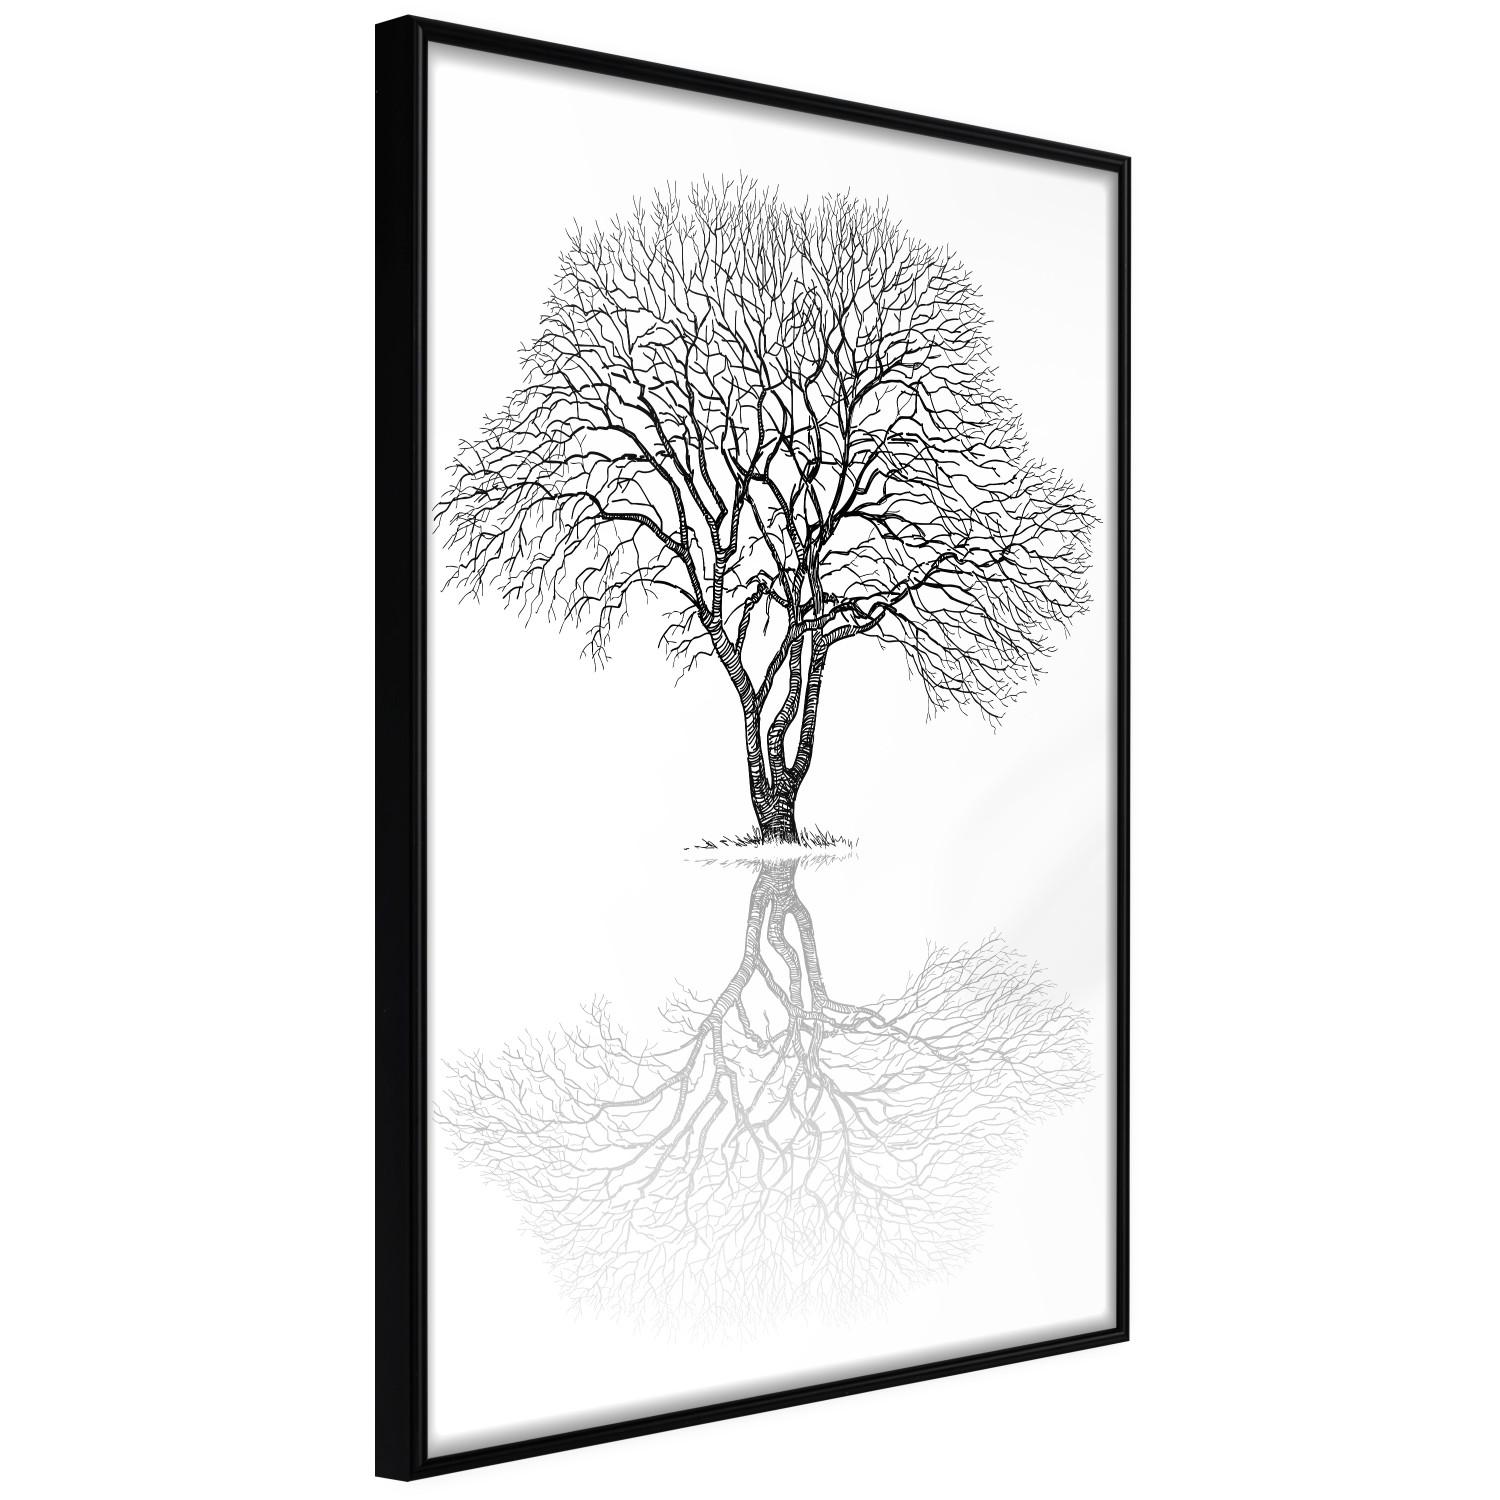 Gallery wall Tree reflection - black and white simple composition with a plant motif